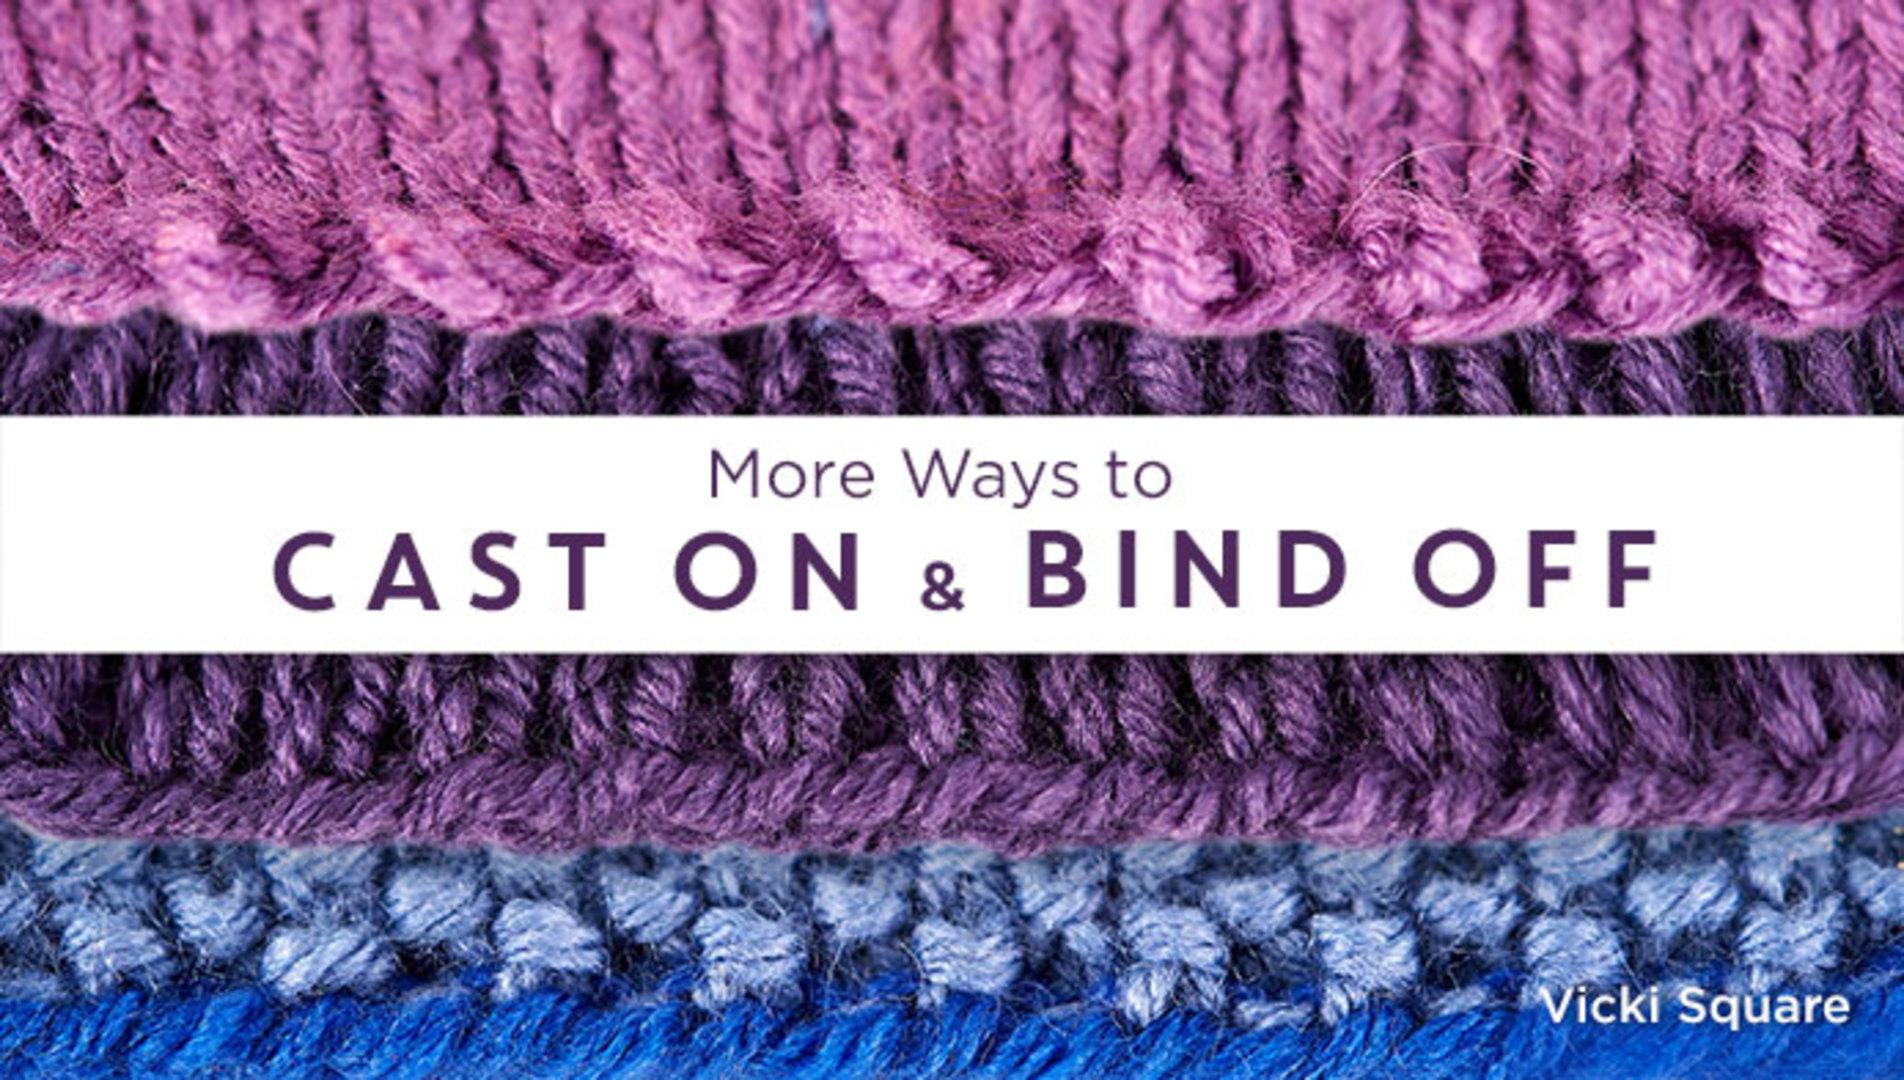 Download More Ways to Cast On & Bind Off | Craftsy